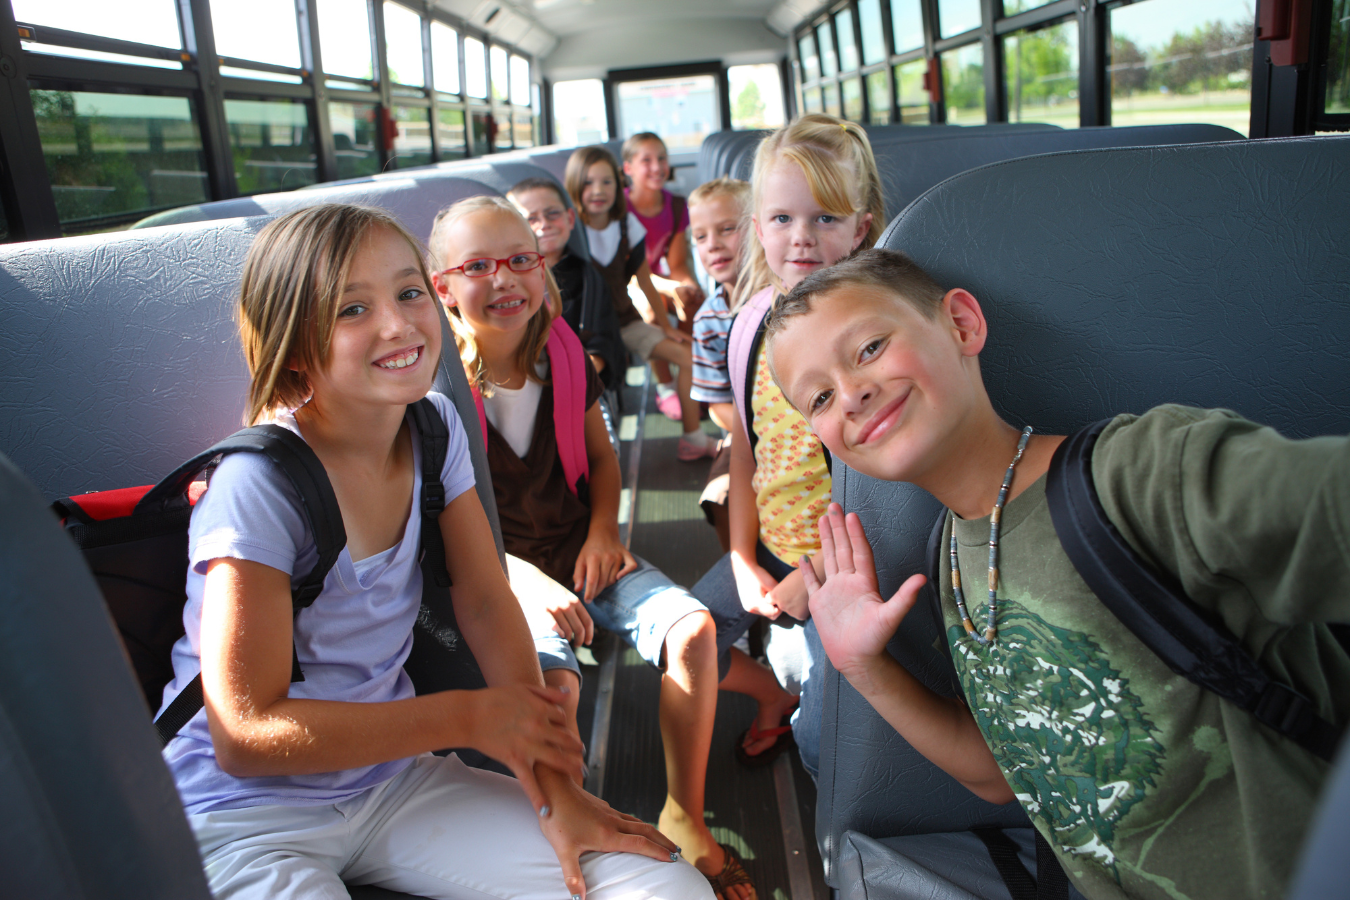 8 K-12 school kids sitting on a bus and waving at the camera. K12 ERP software like Sparkrock 365 helps administrators focus on long-term success for their school districts.